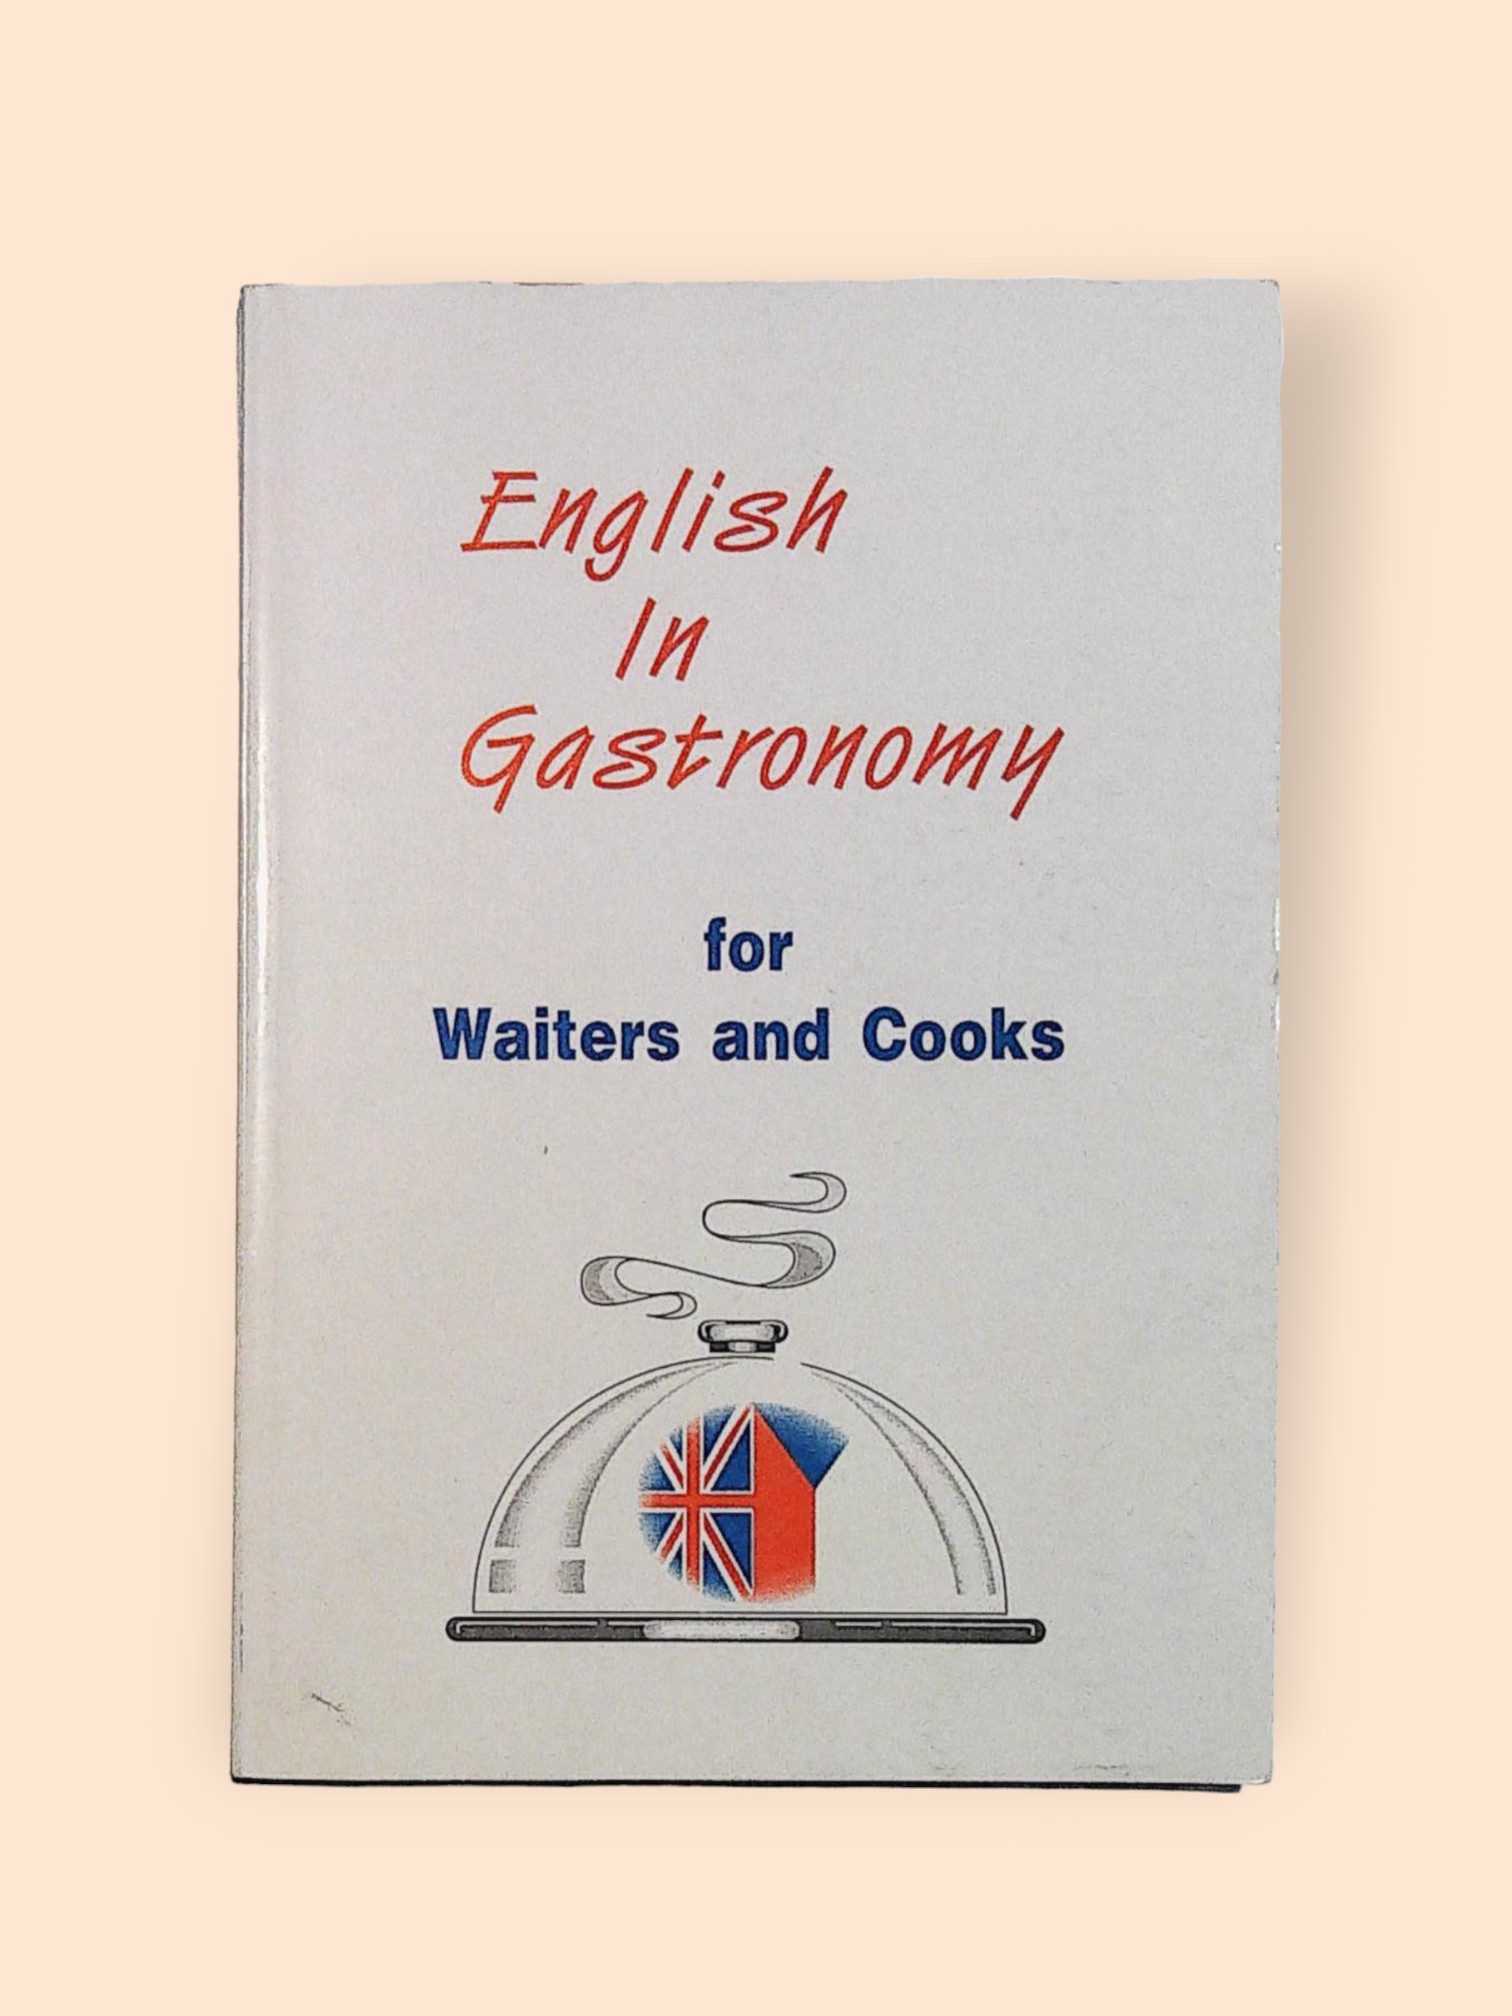 English-In-Gastronomy-for-Waiters-and-Cooks-Kunst-Petr